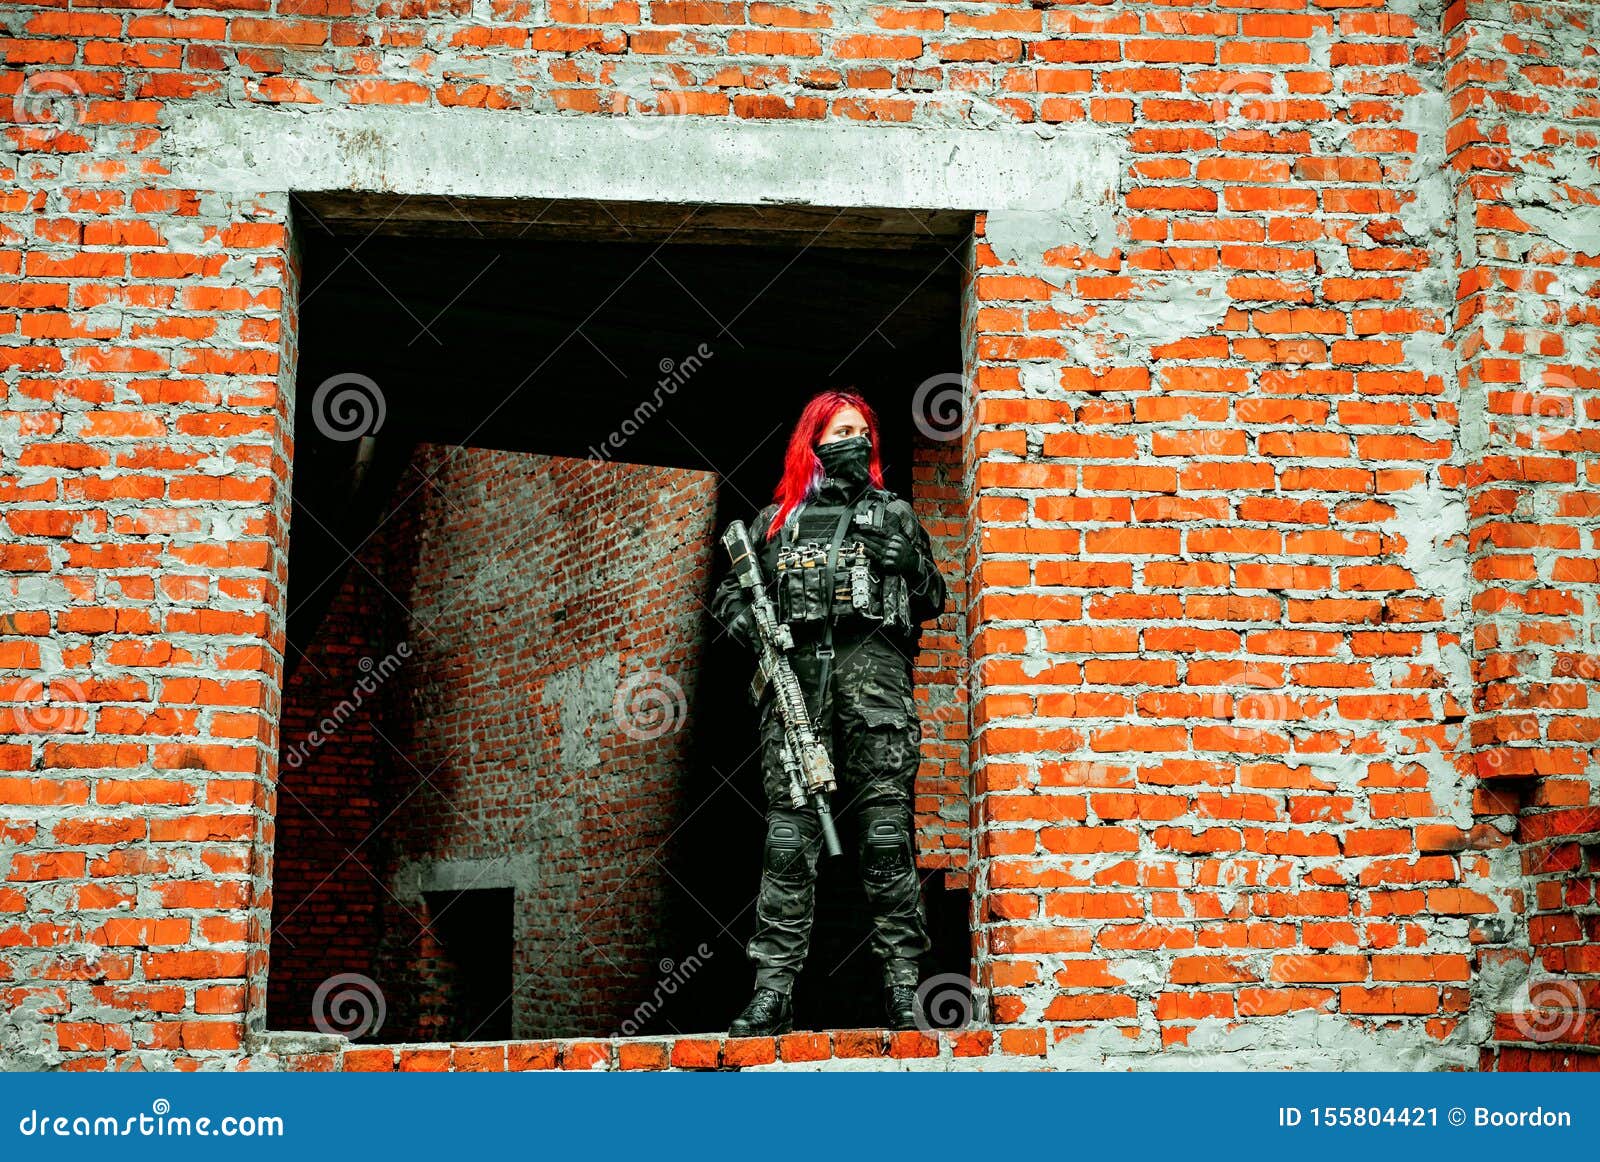 airsoft red-hair woman in uniform with machine gun standing on ruins